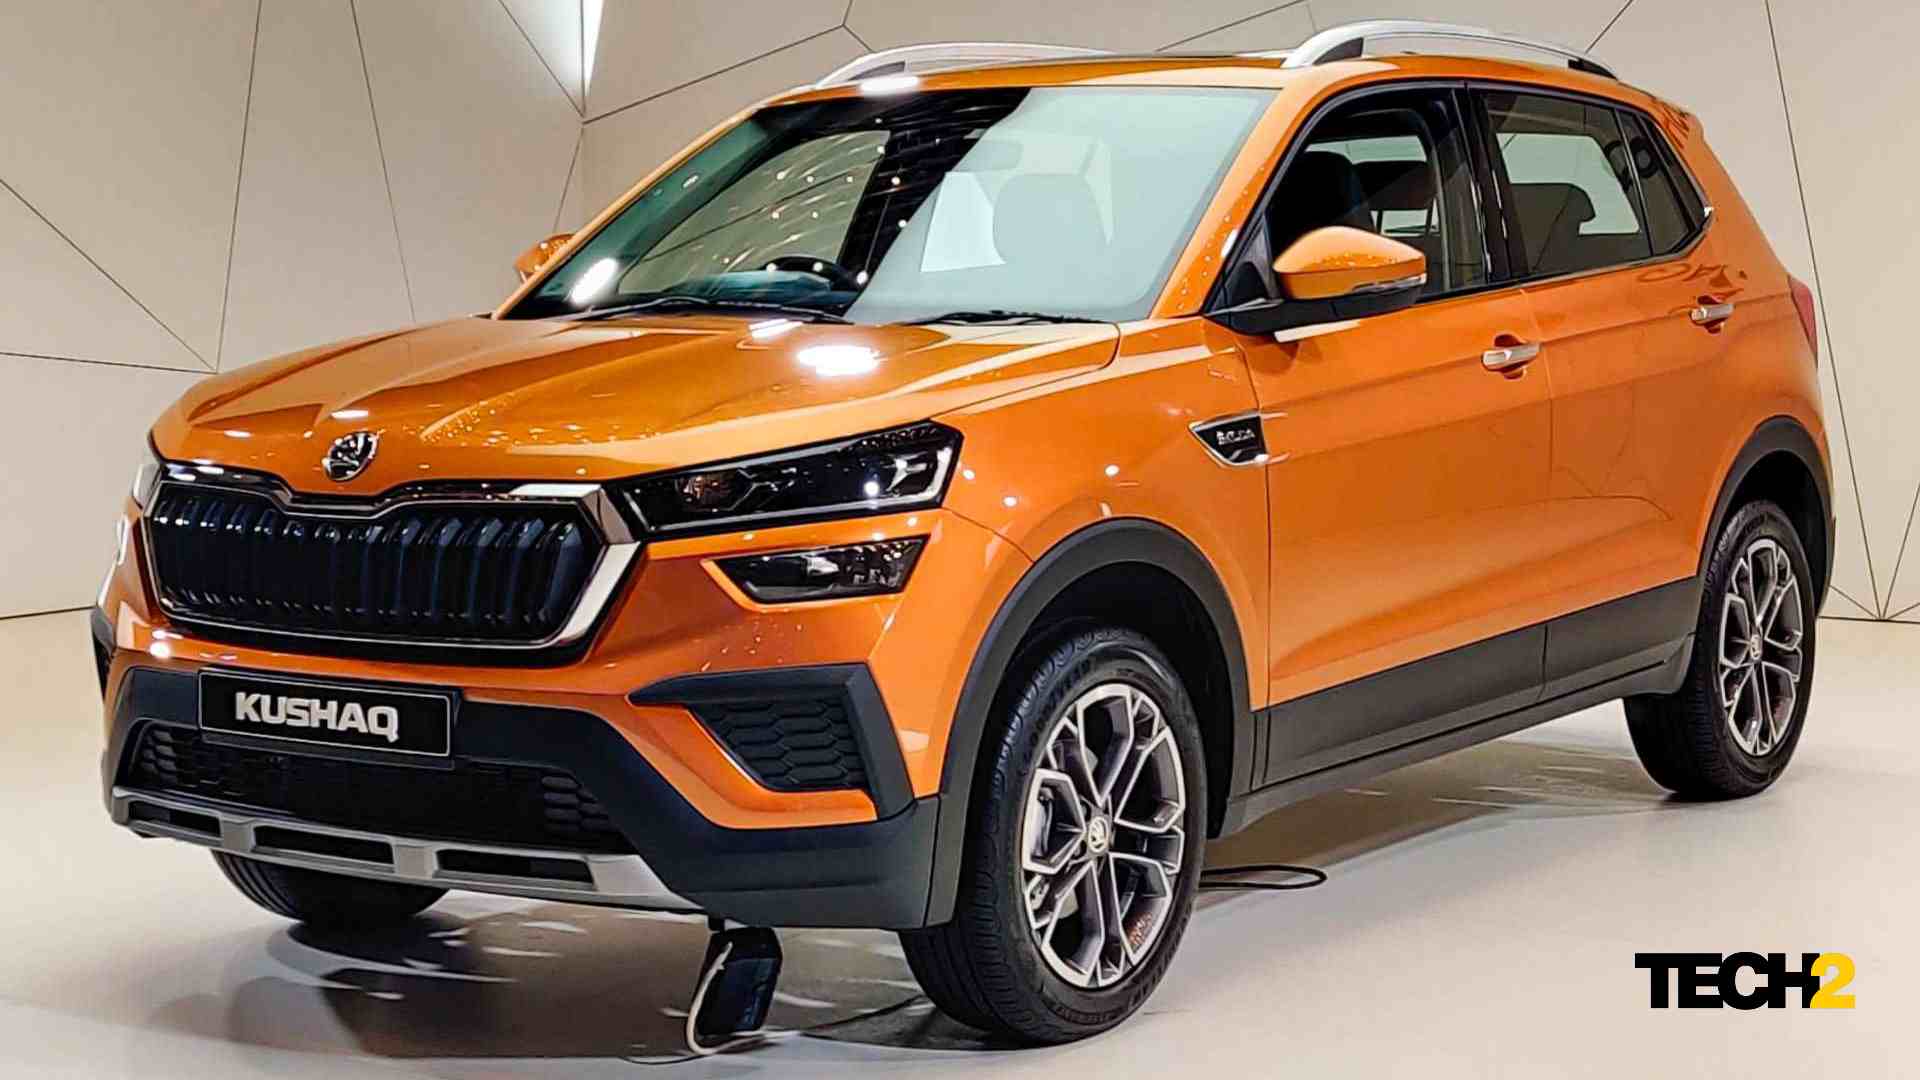 Skoda Kushaq midsize SUV launched in India Check prices, variants